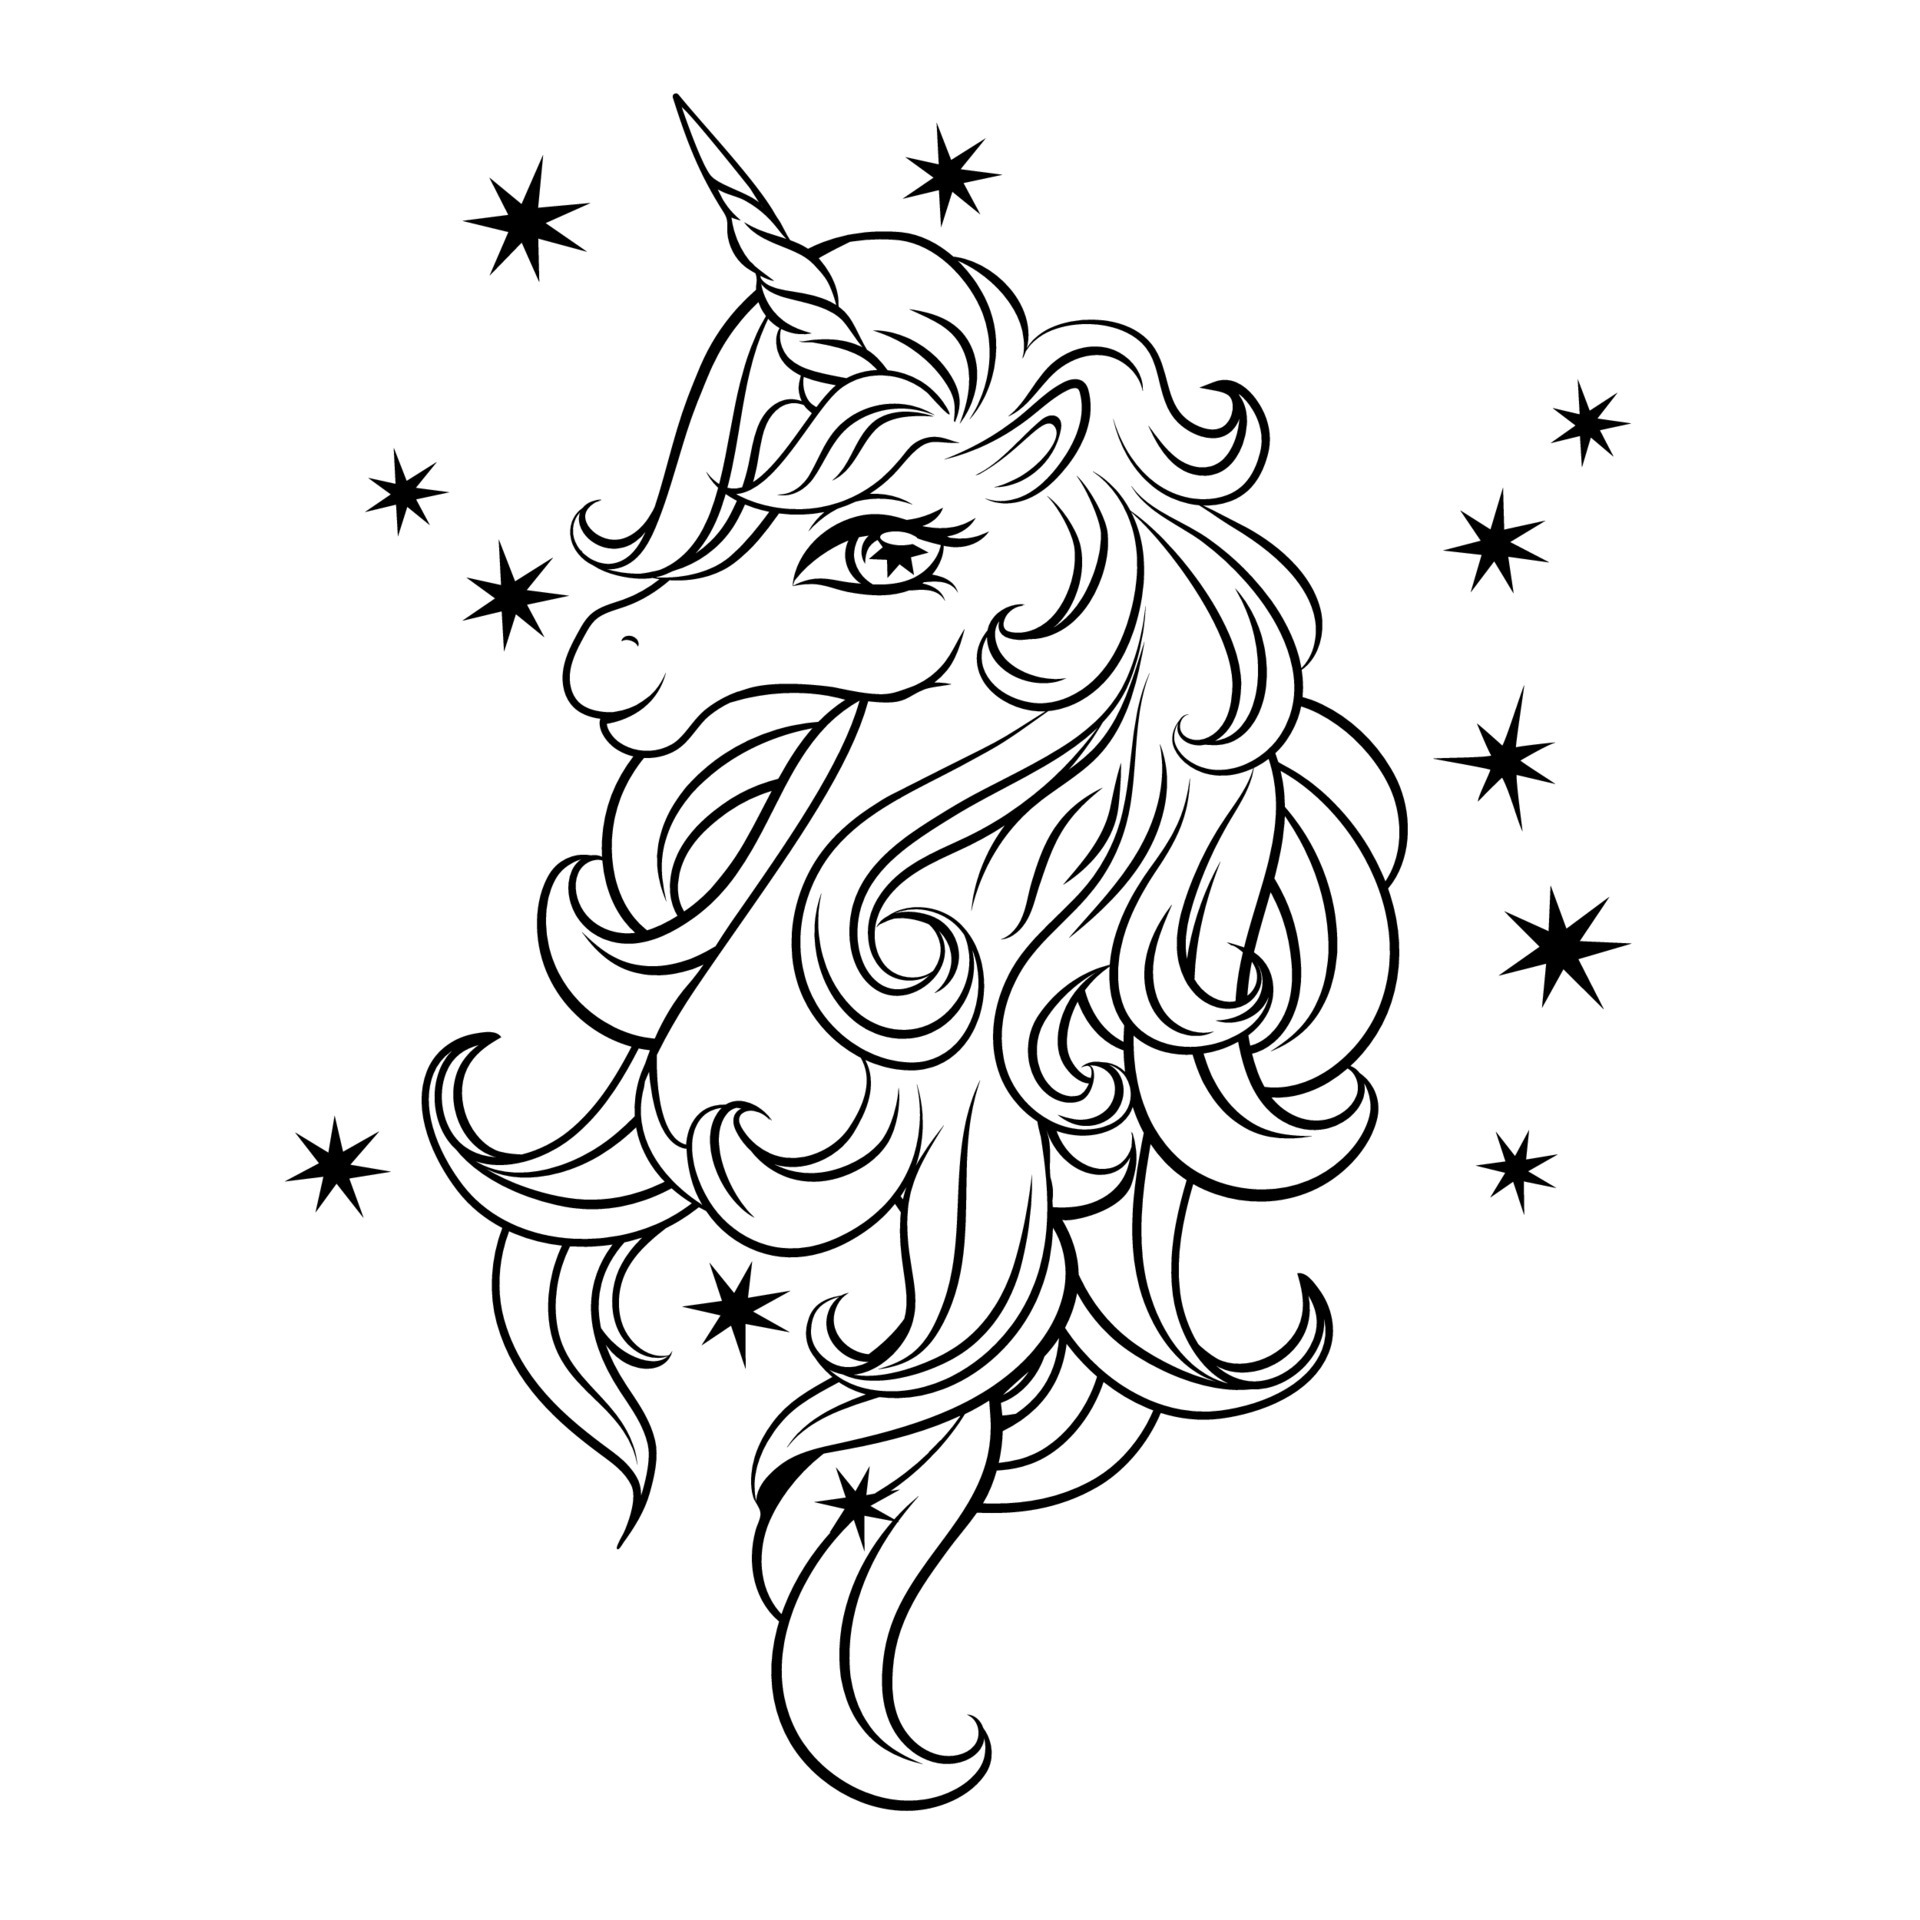 Cute Cute Unicorn Coloring Page Outline Sketch Drawing Vector, Cute Unicorn  Drawing, Cute Unicorn Outline, Cute Unicorn Sketch PNG and Vector with  Transparent Background for Free Download